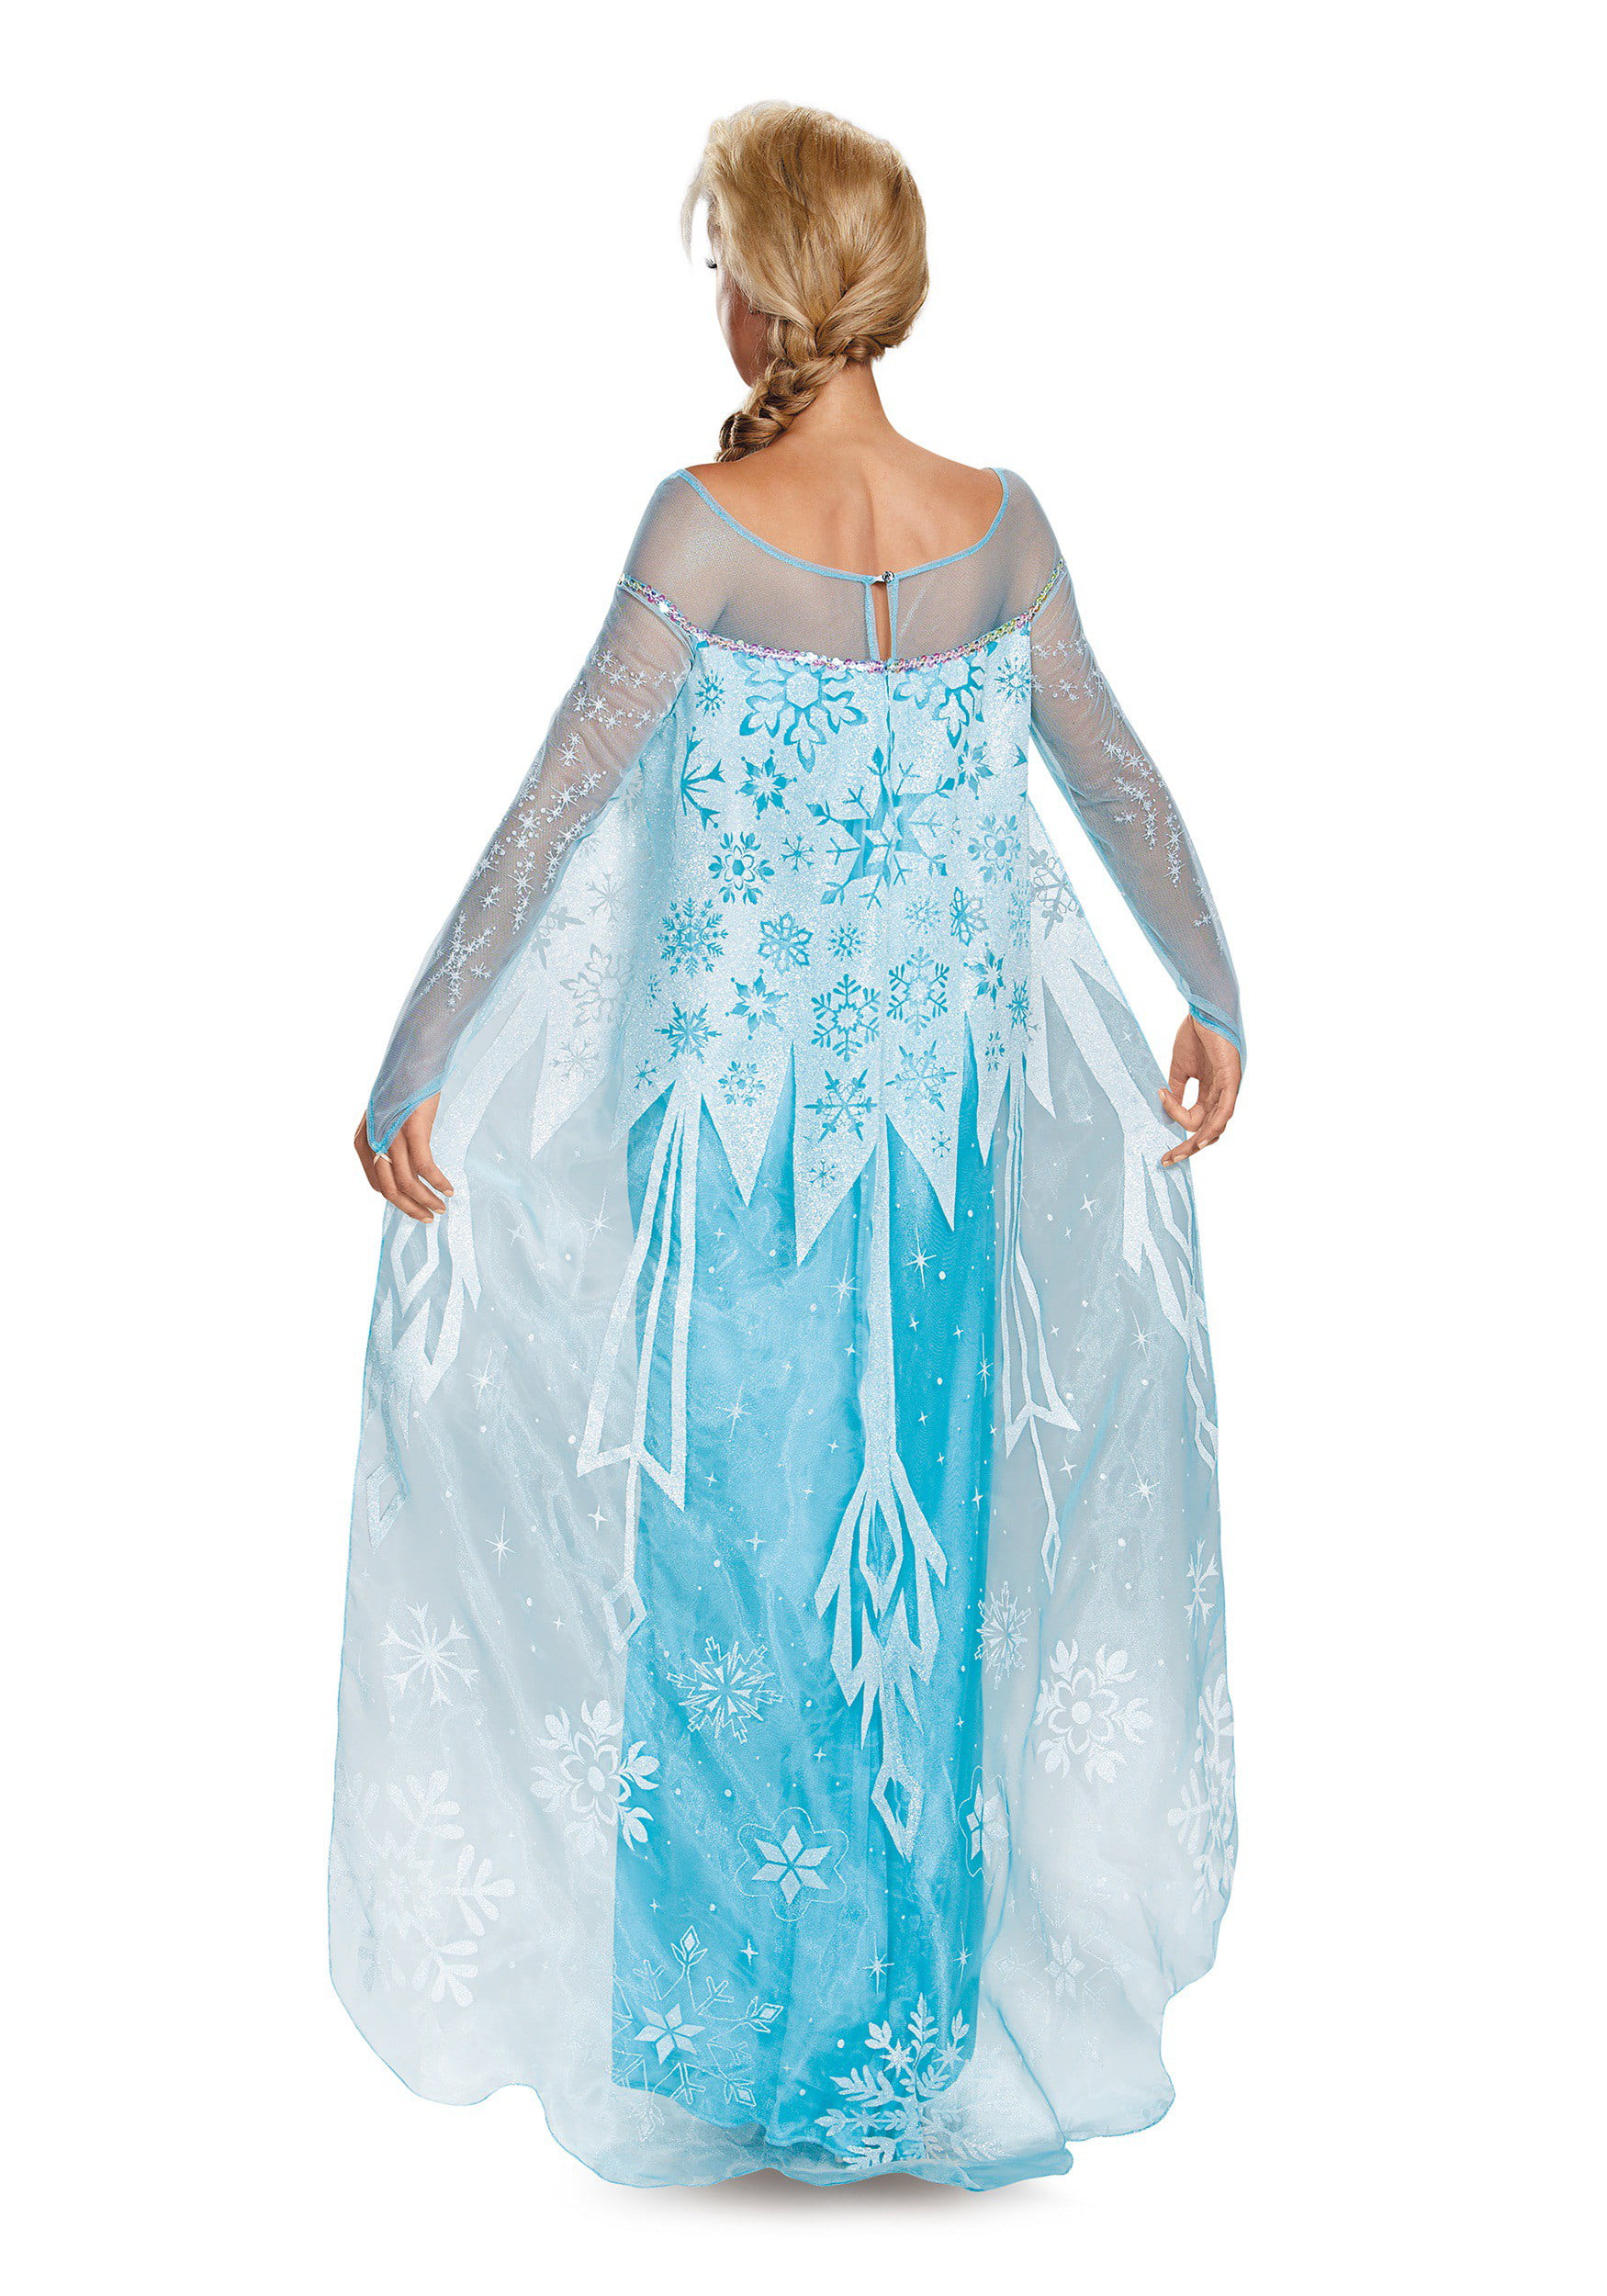 elsa outfit adult